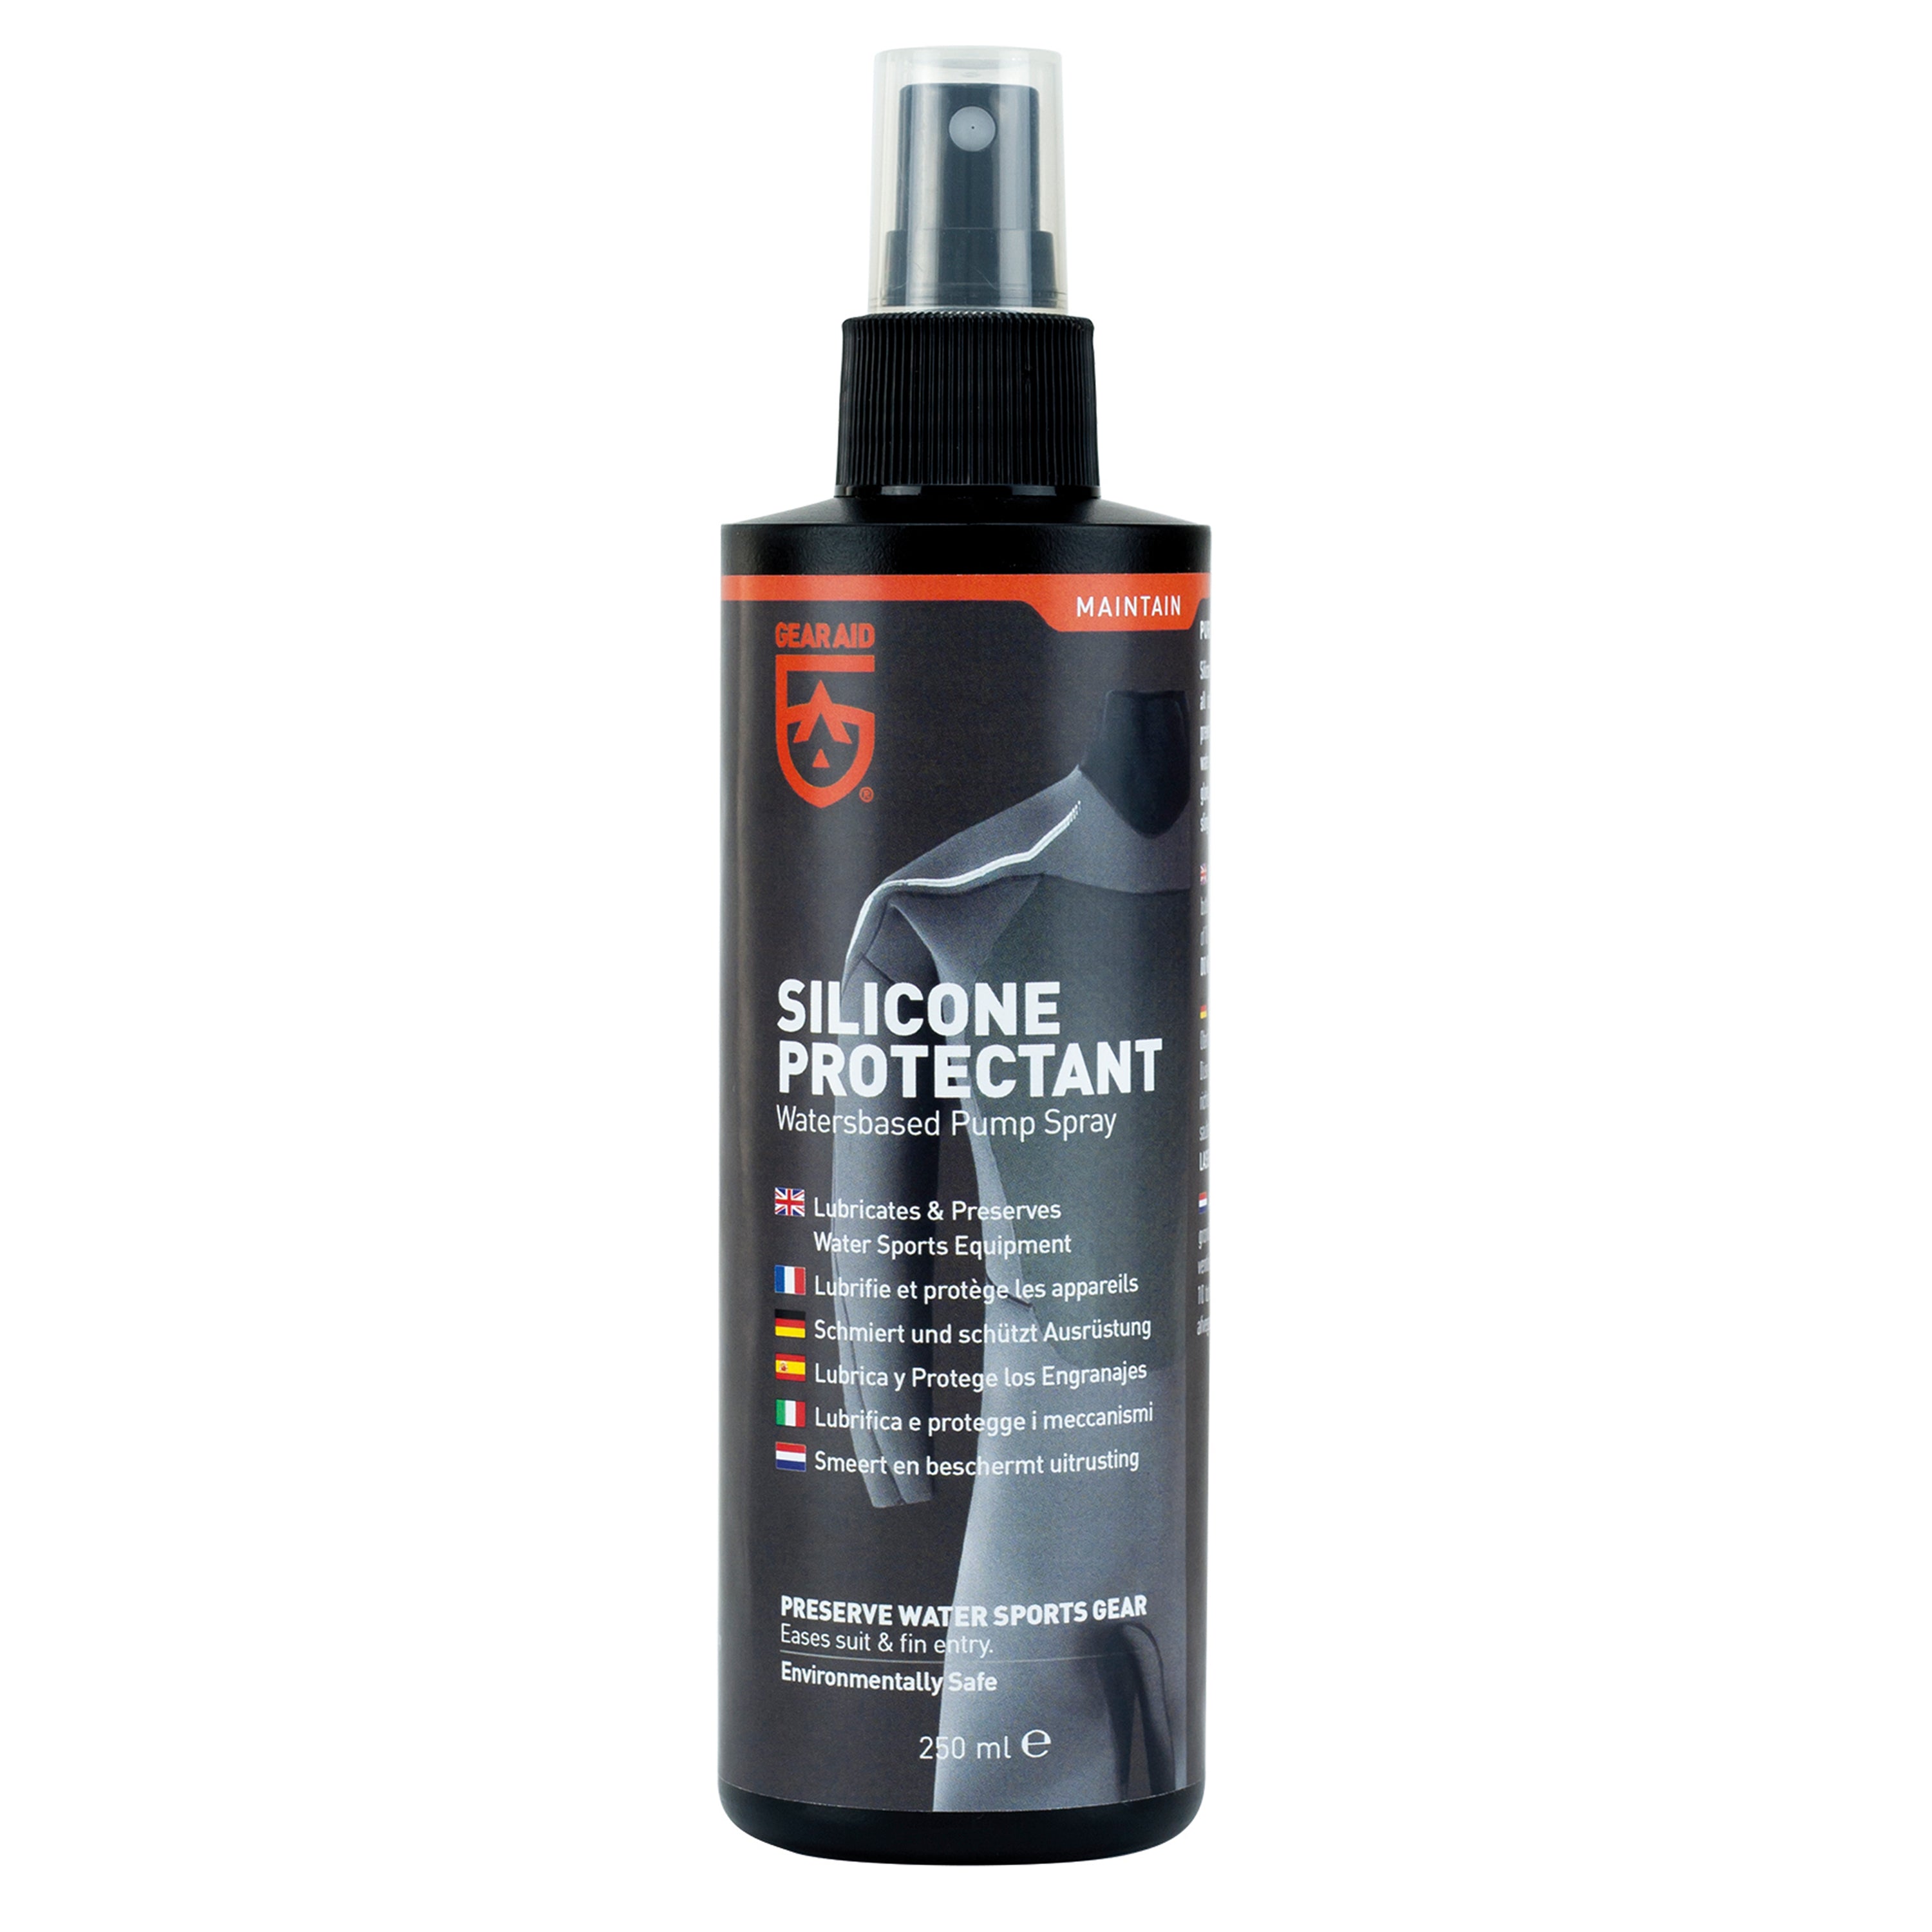 Silicone Protectant Spray